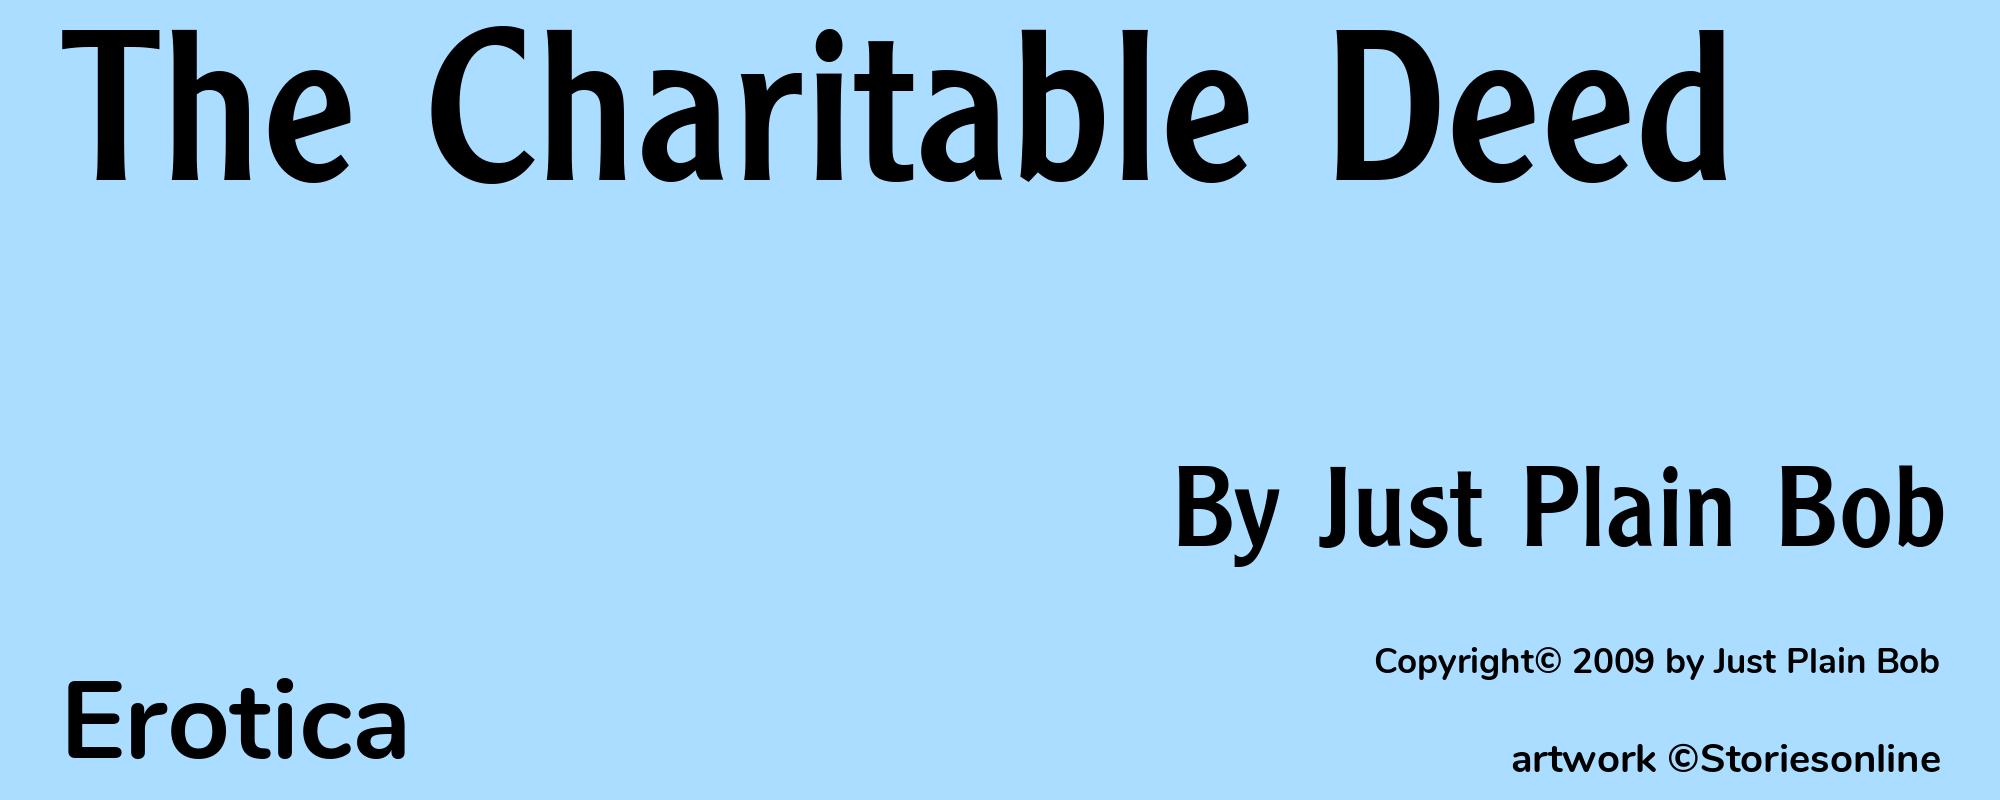 The Charitable Deed - Cover